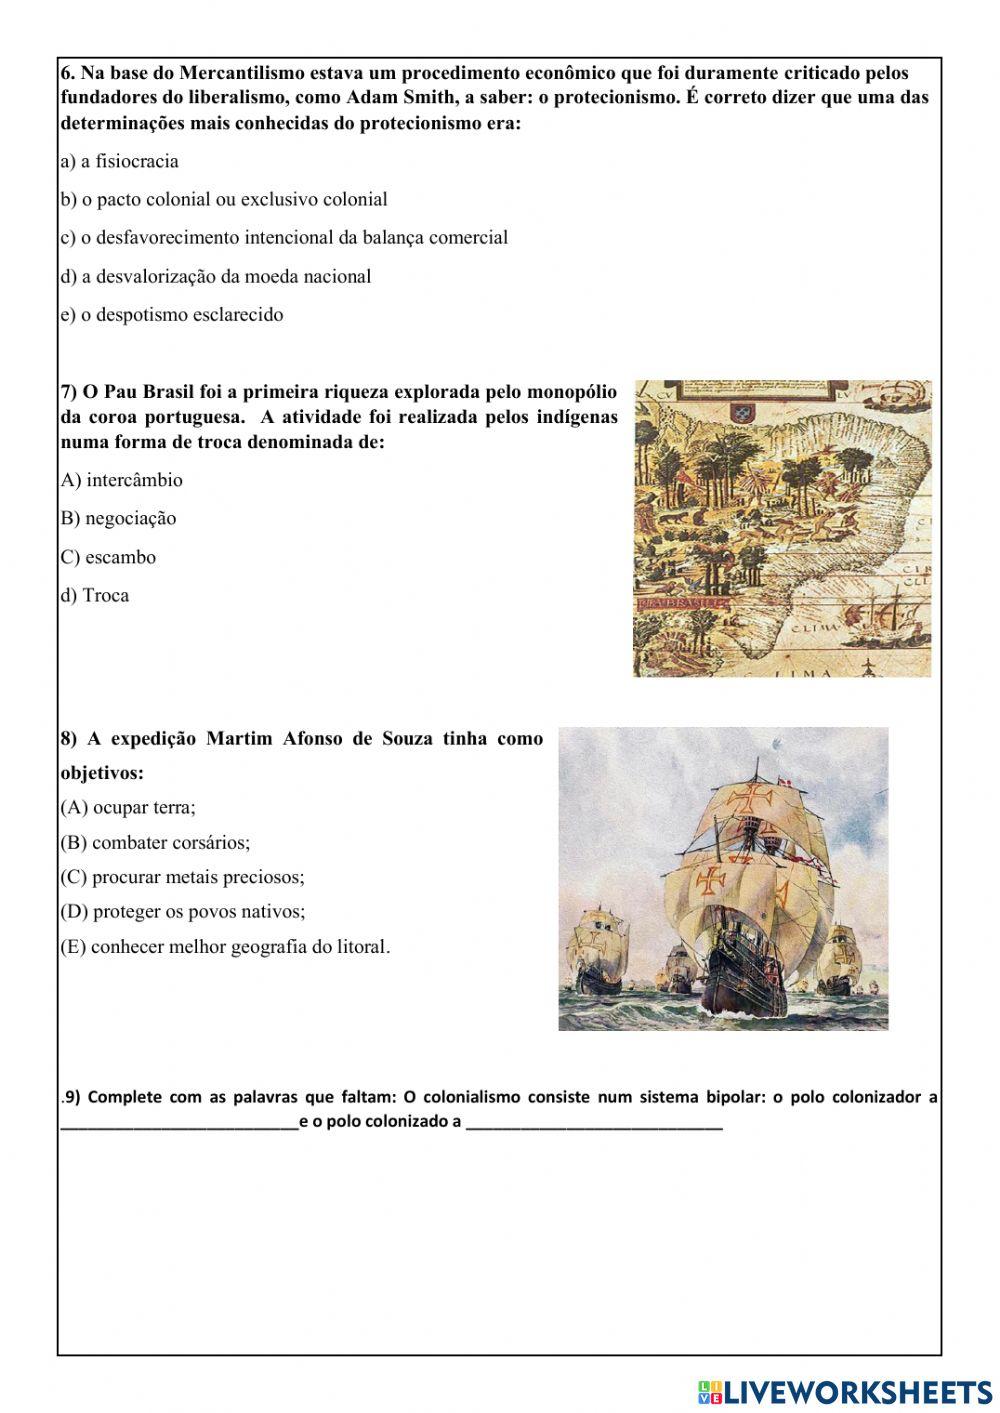 Mercantilismo(2) online exercise for